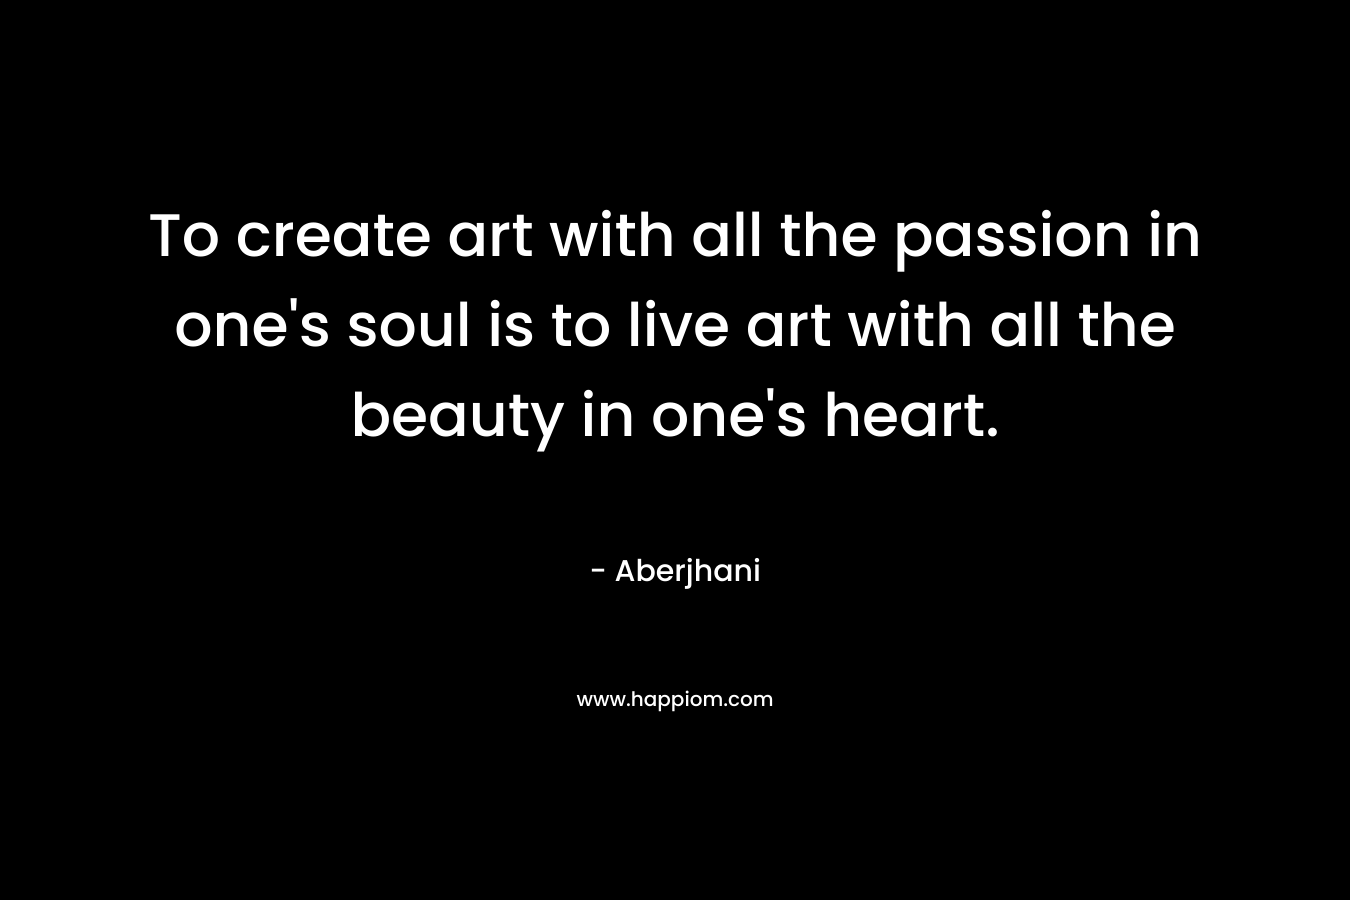 To create art with all the passion in one's soul is to live art with all the beauty in one's heart.